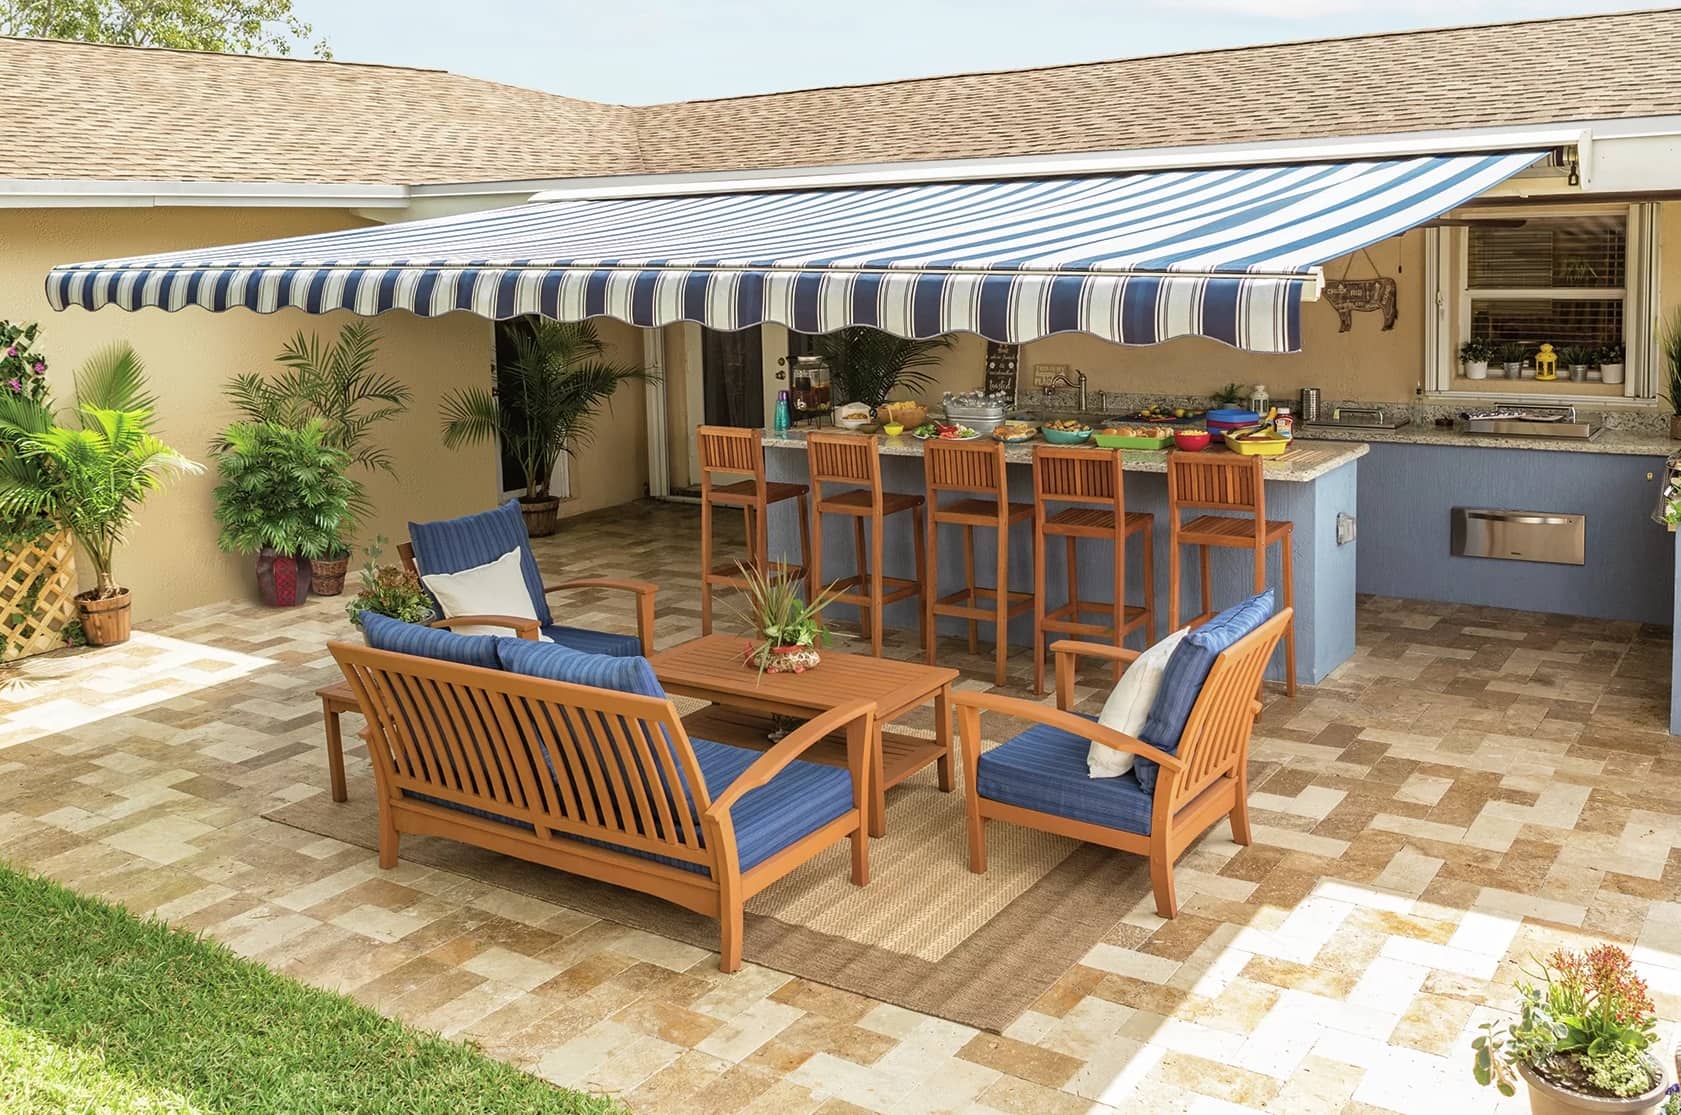 11 Amazing Sunsetter Retractable Awnings For Patio For 2024